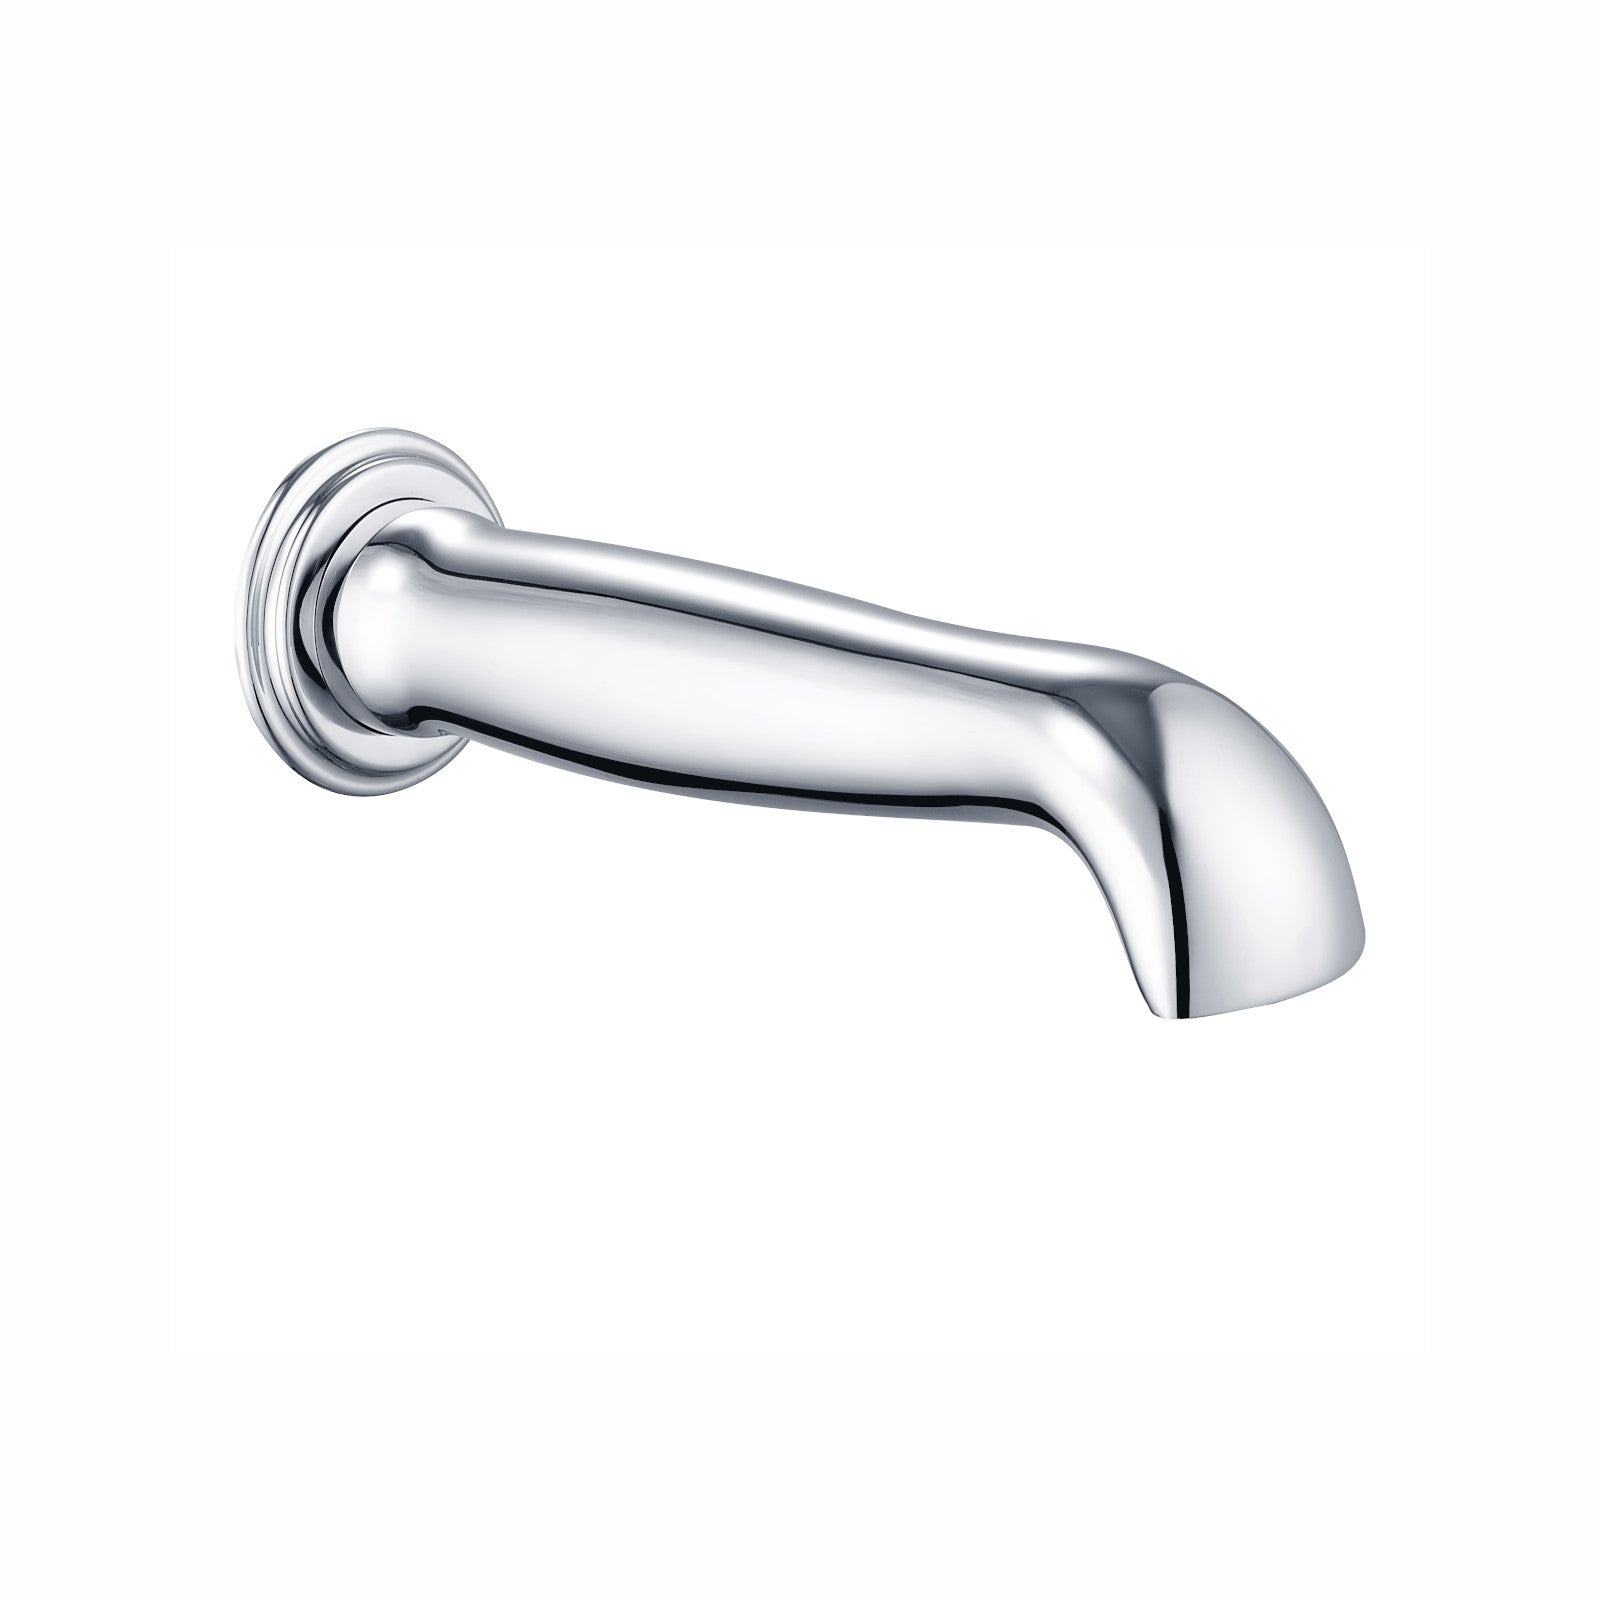 Traditional bath or basin spout wall mounted - chrome - Showers